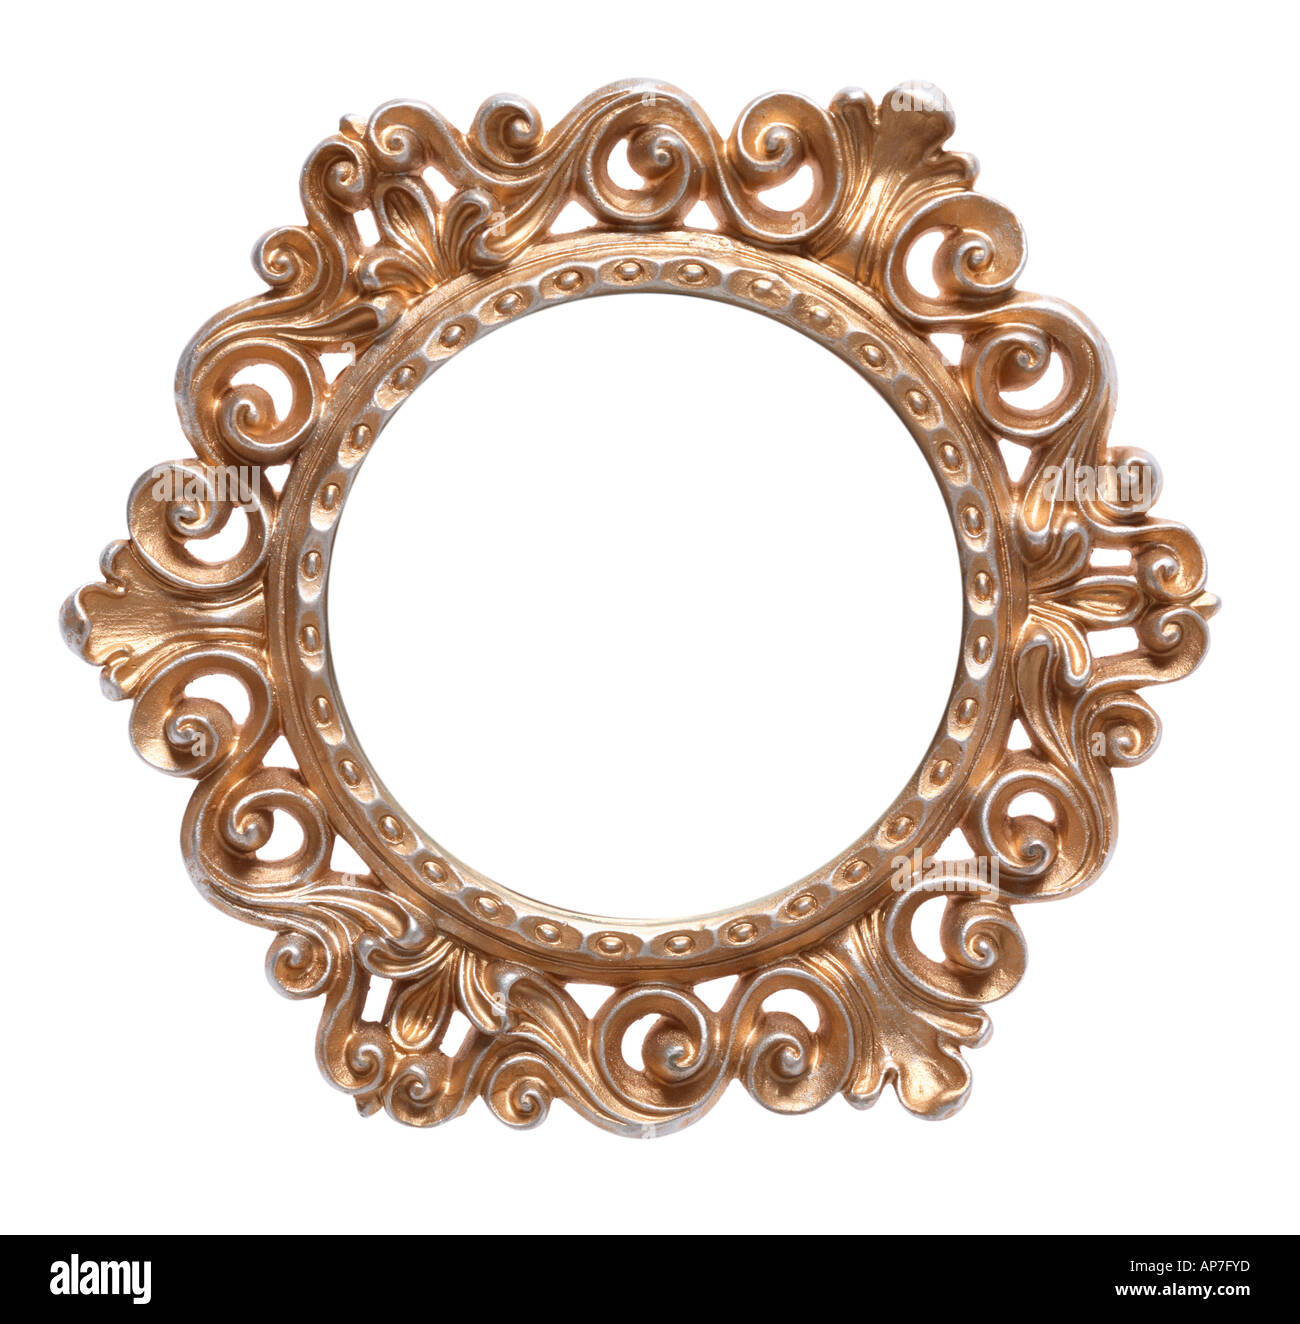 Round Ornate Picture Frame Stock Photo